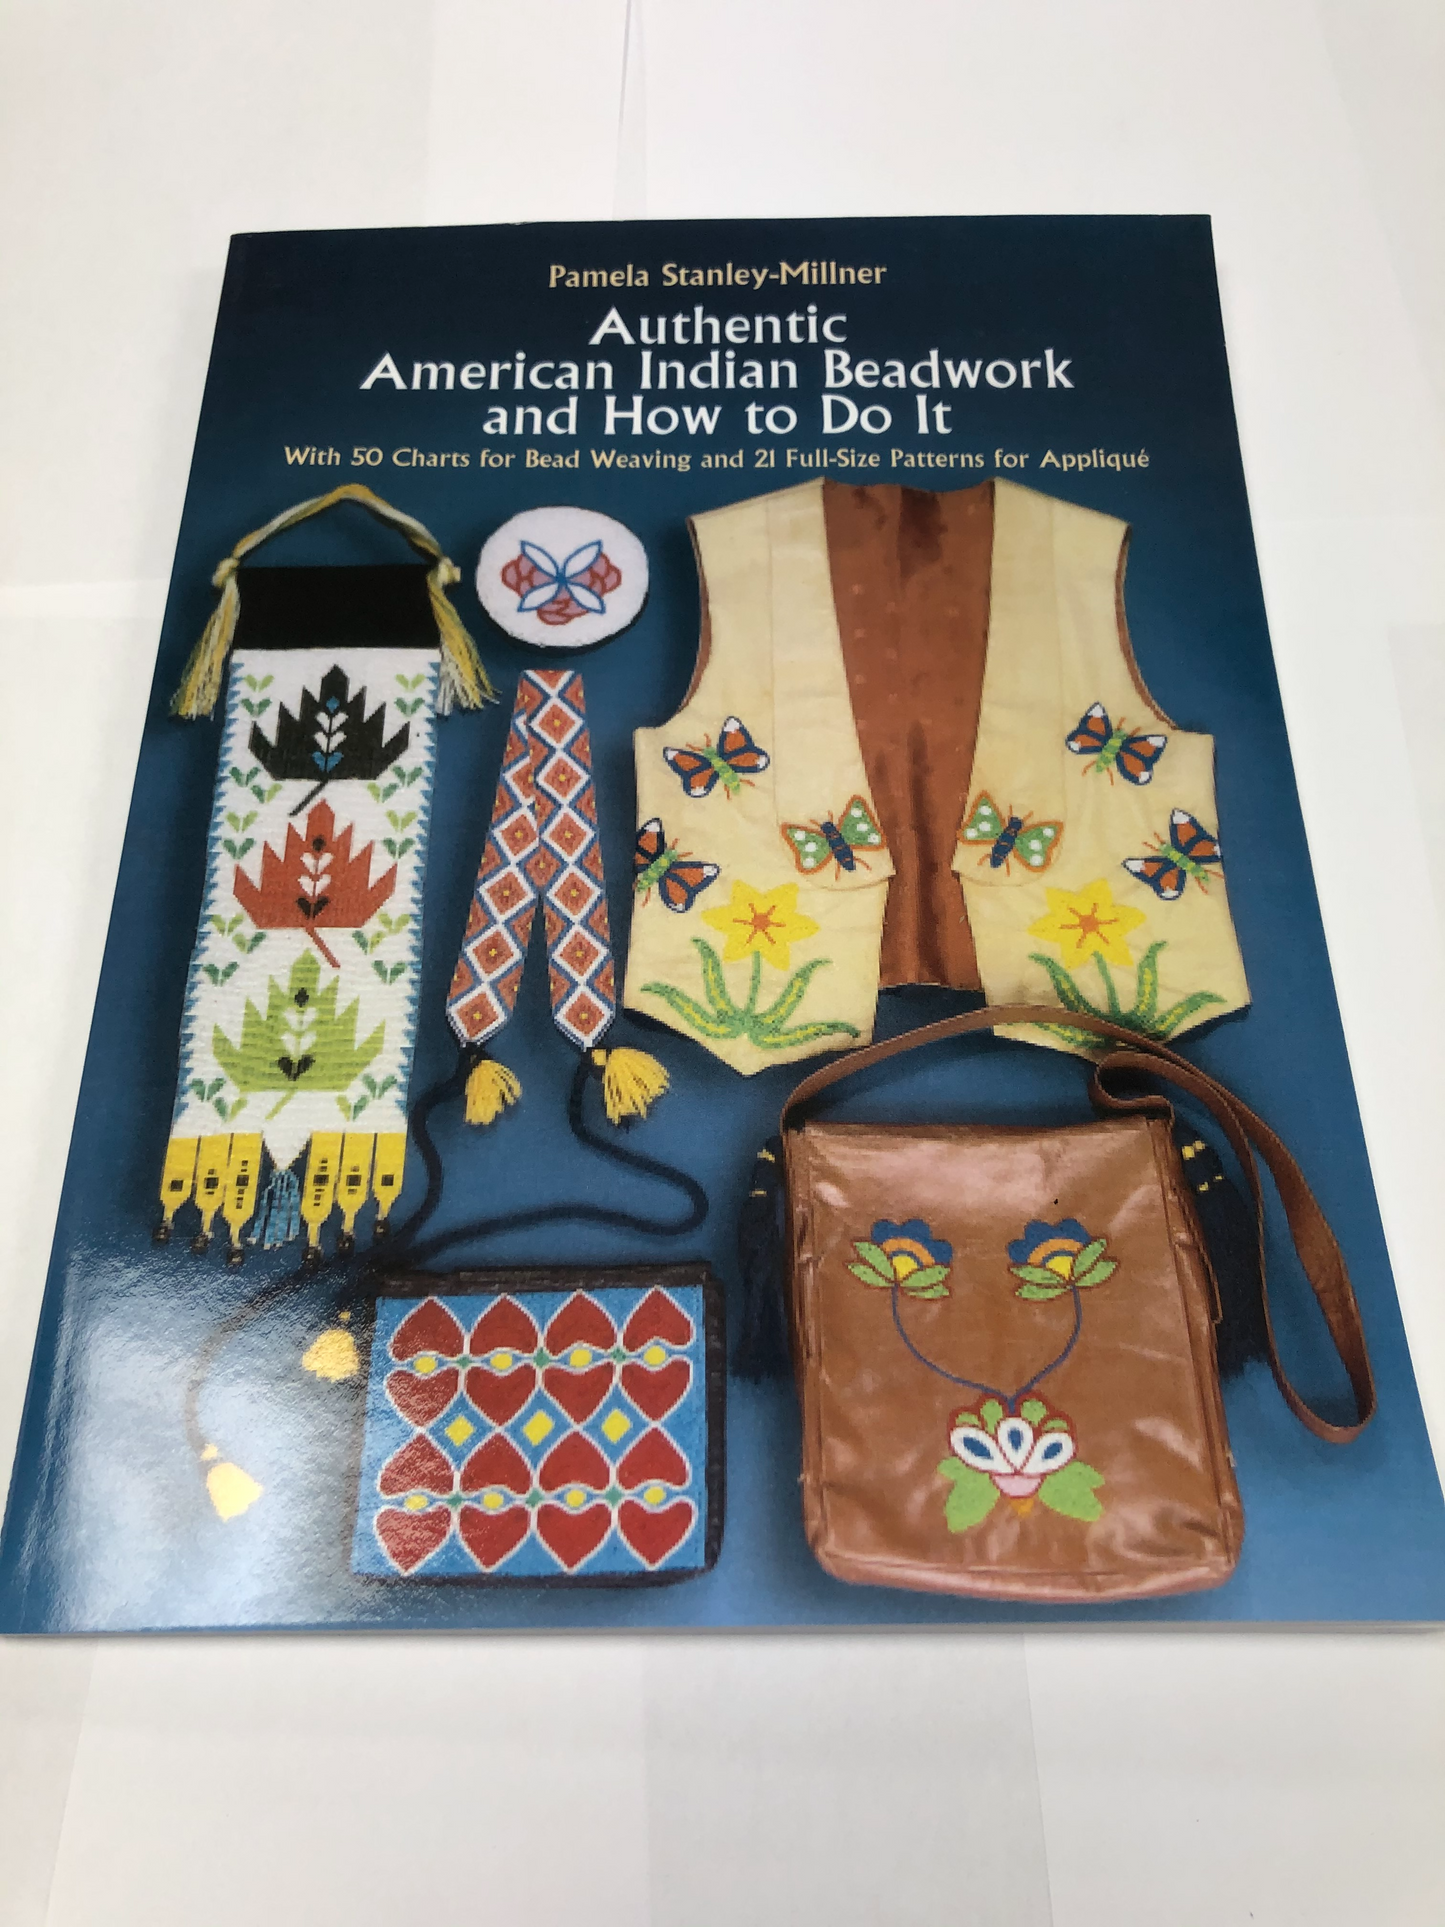 Authentic American Indian Beadwork and How to Do It